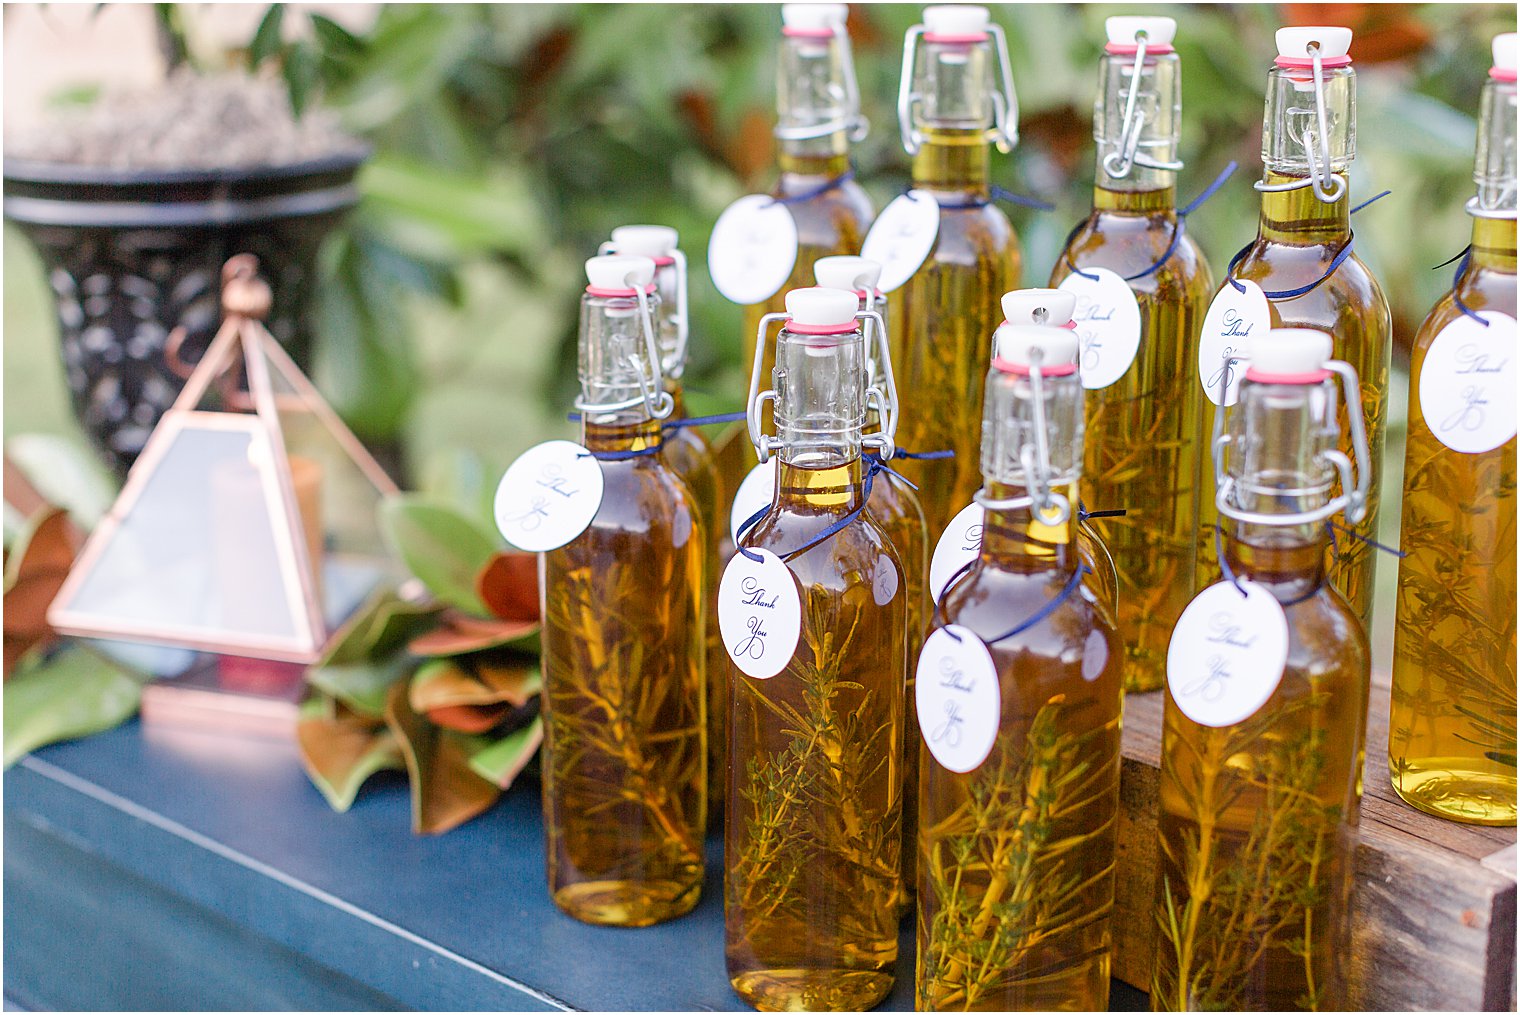 Wedding Favors of bottled olive oil and thyme displayed on blue table 